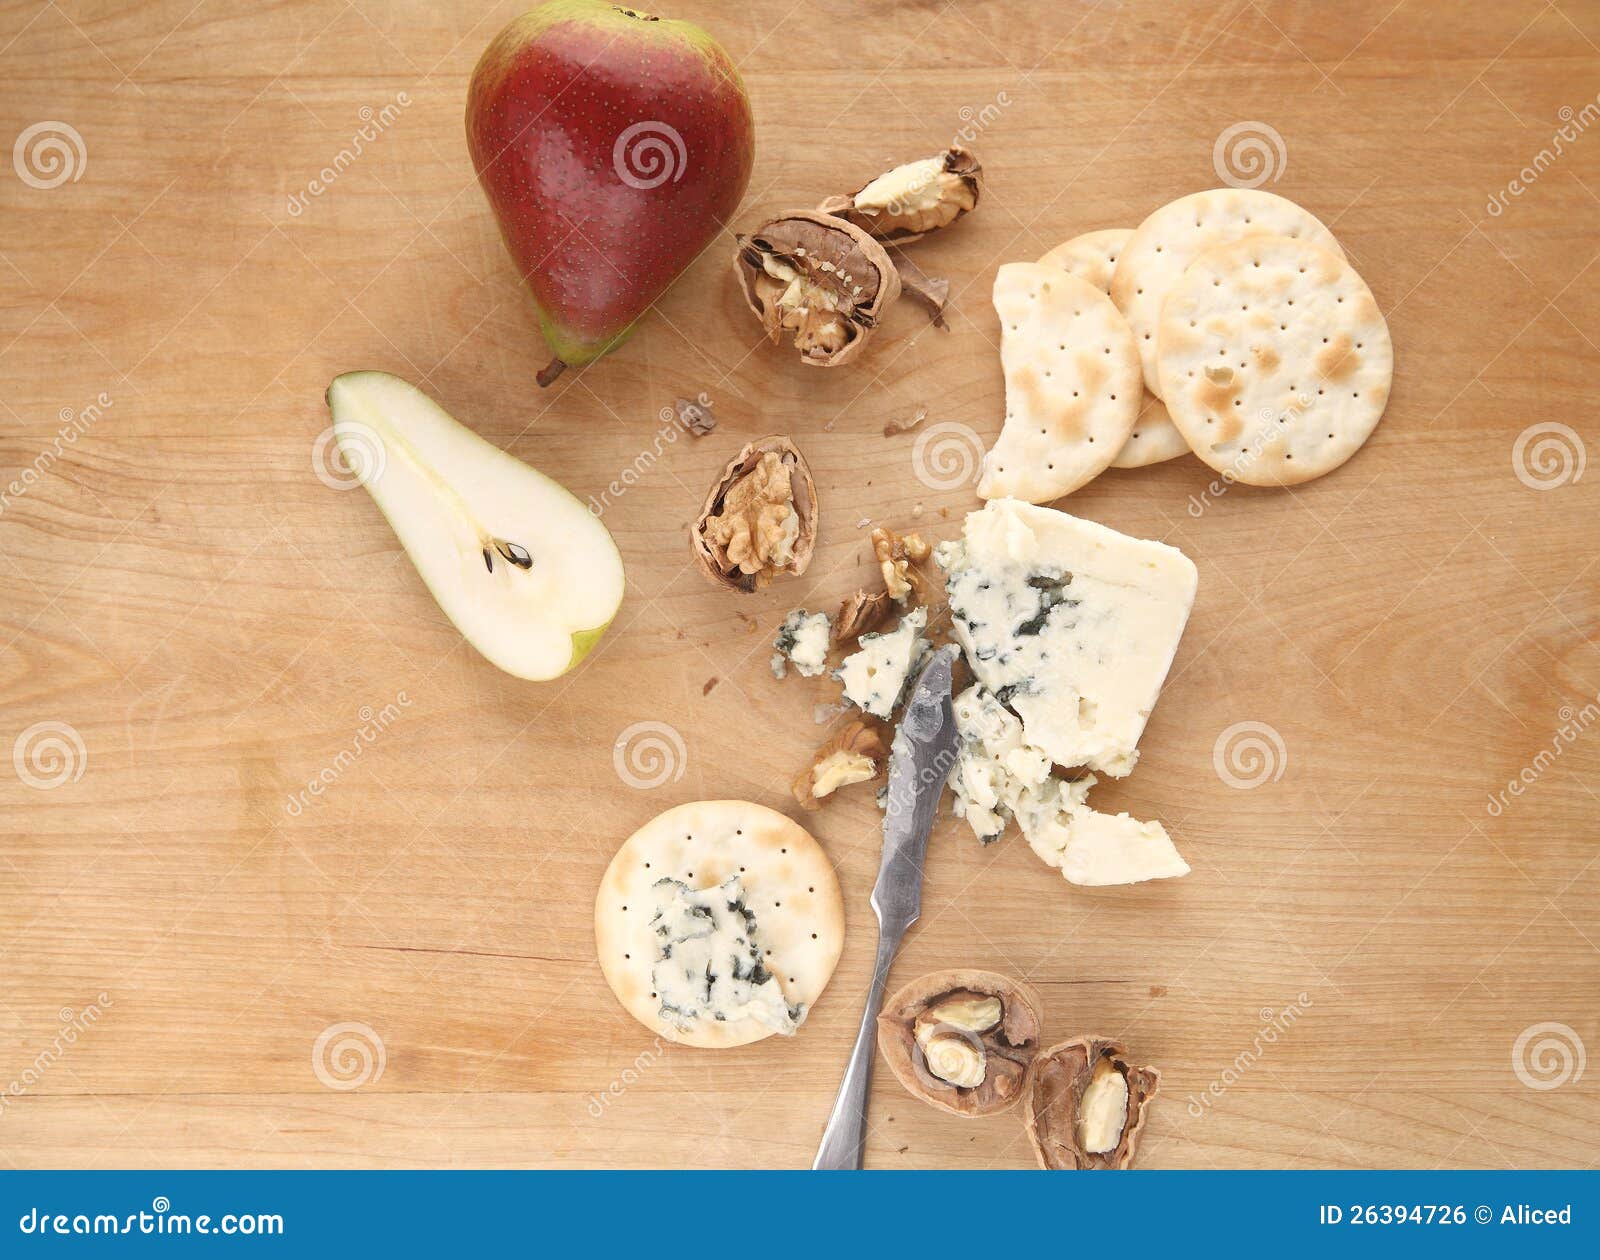 Pears, walnuts and blue cheese. Chunk of blue cheese with crackers, pear and walnuts on a cutting board